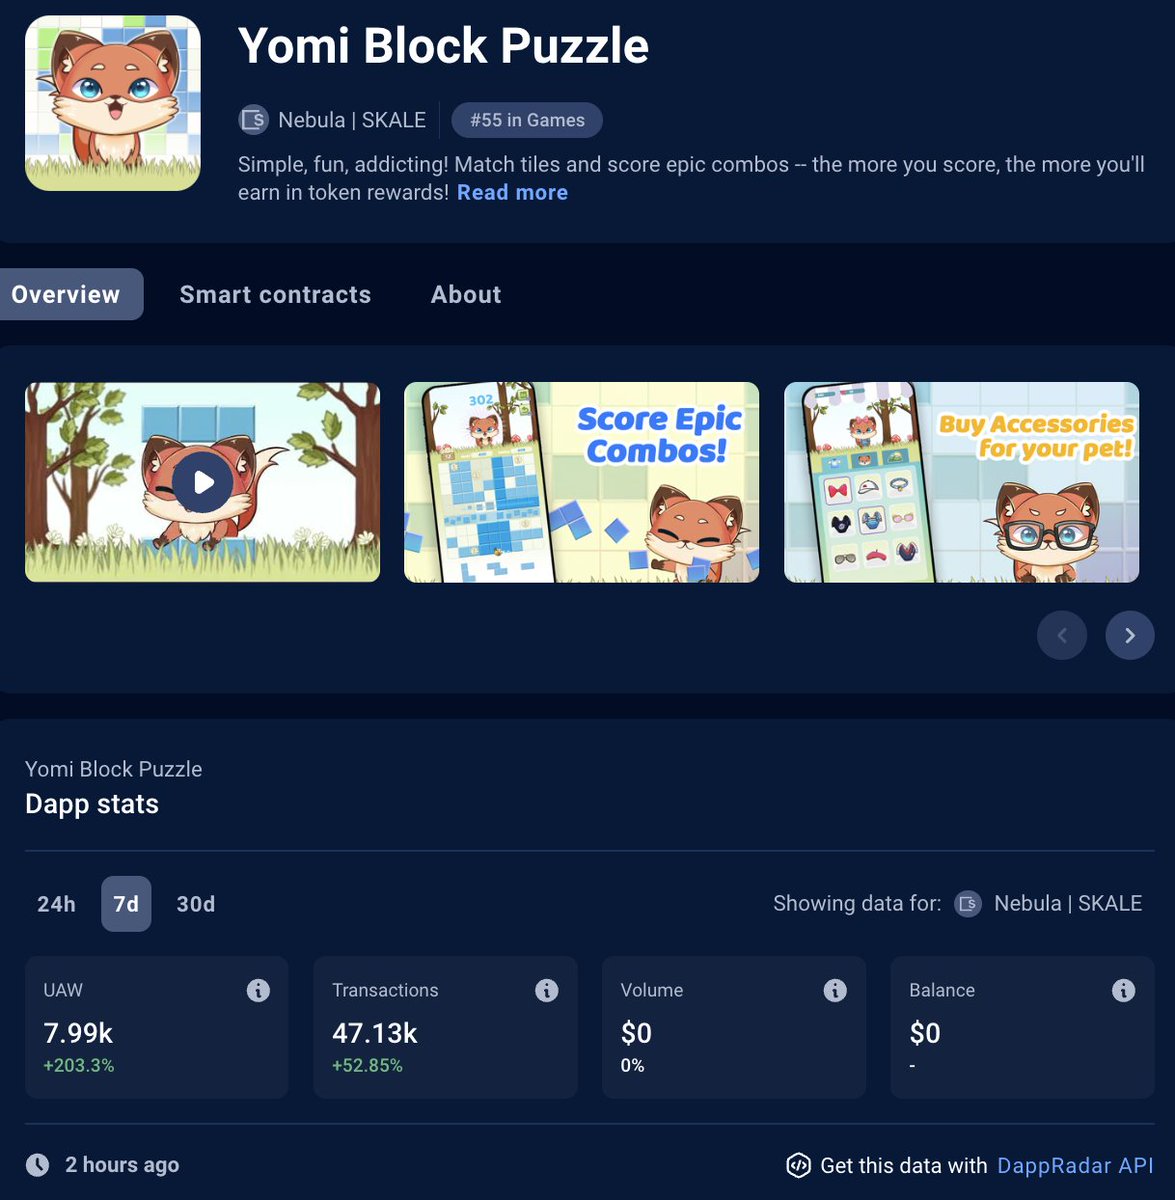 Block Puzzle by @yomigamesgg is one of the fastest growing blockchain games! 🧩 In the last 7 days, the game's UAW are up over 200%, and 50,000 transactions have been executed at zero cost. Thats the power of gas-free gaming on SKALE. 🚫⛽️ Play now: bit.ly/3tuApao